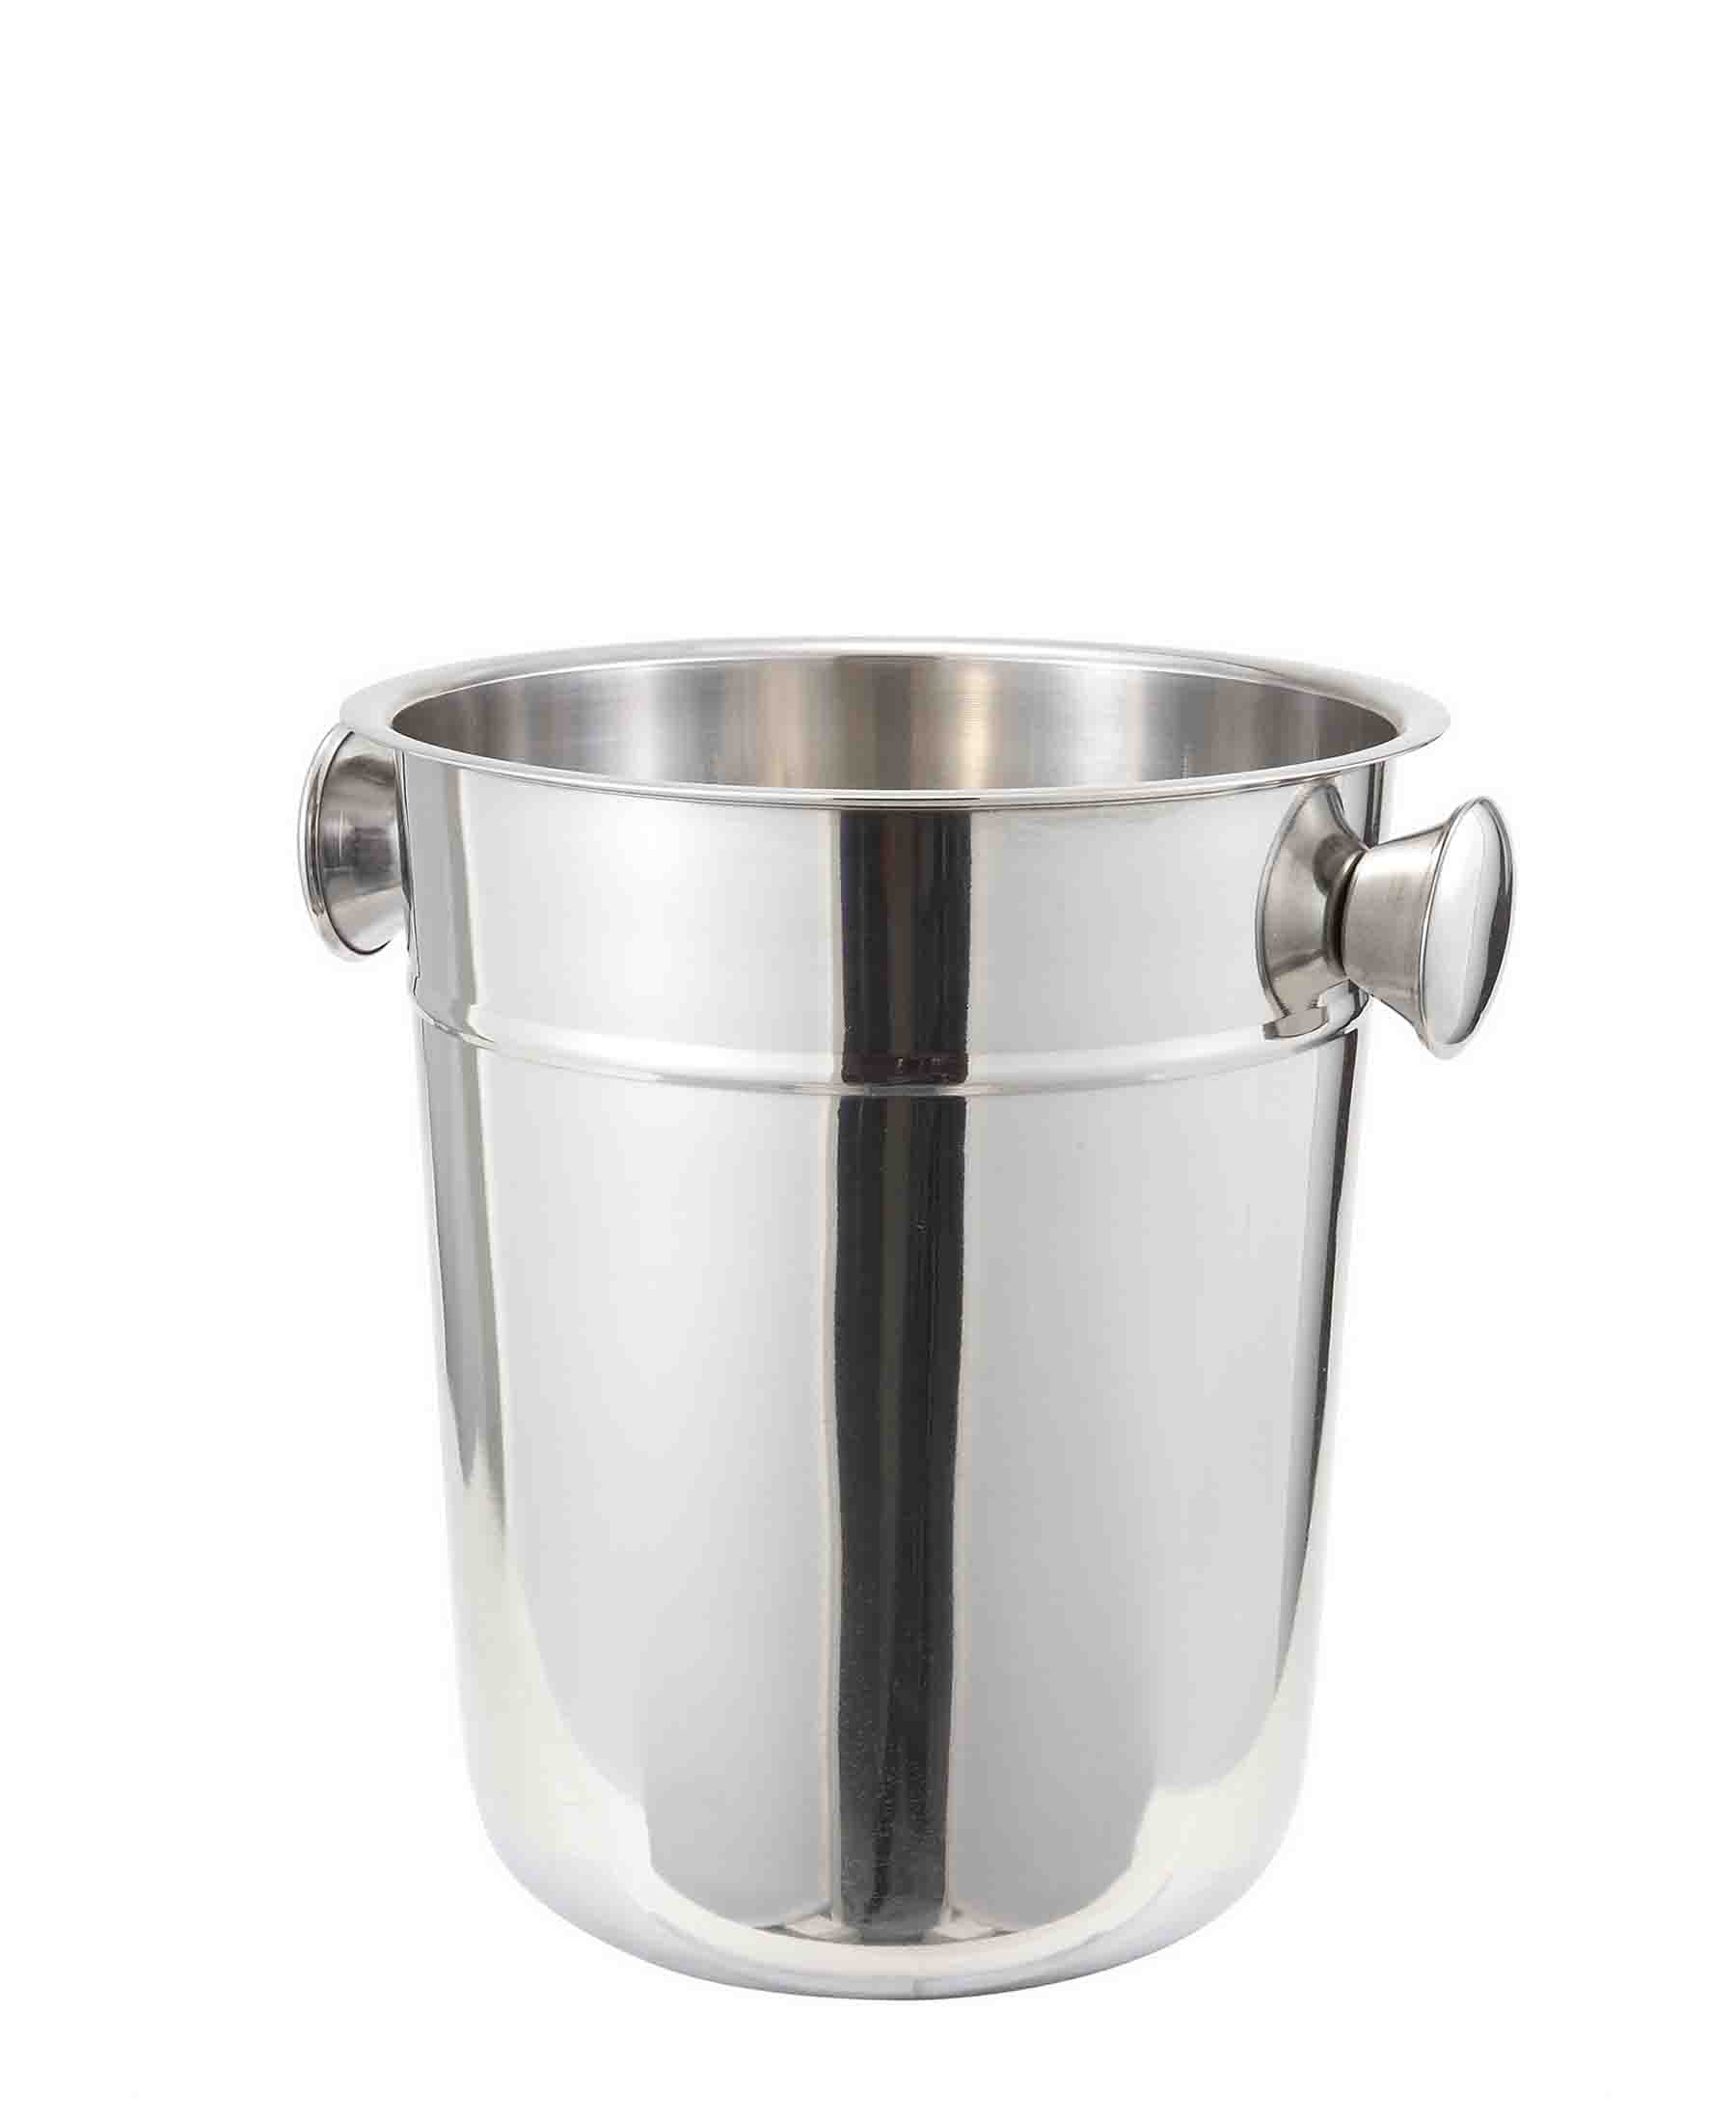 Steel King Champagne Cooler - Silver